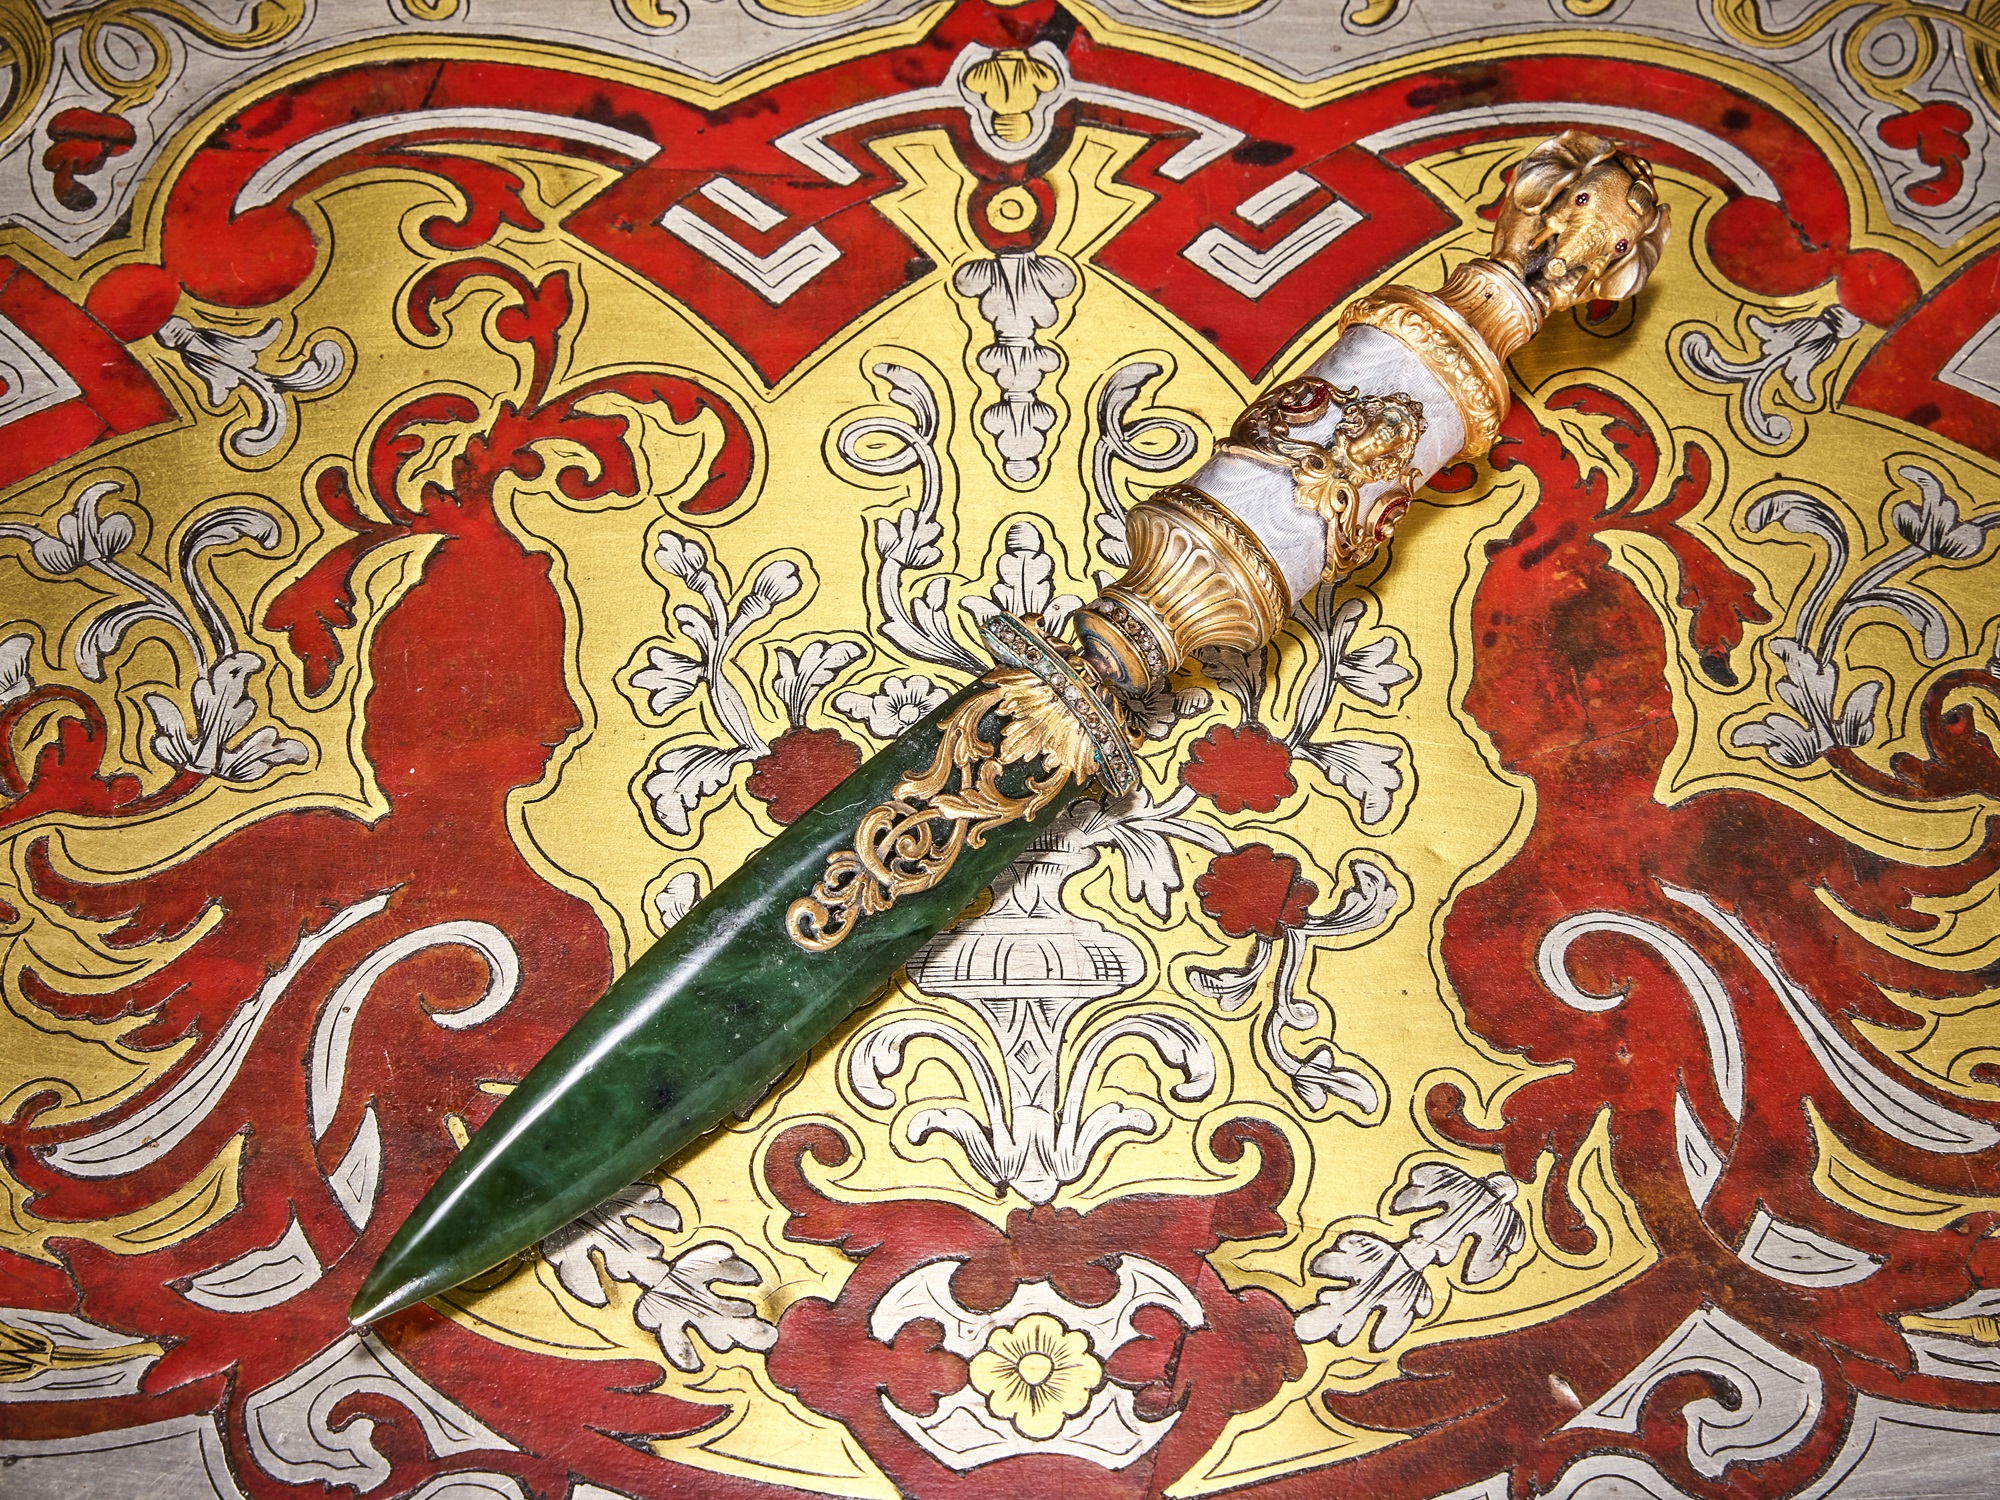 A FABERGE STYLE SILVER GILT, DIAMOND SET, NEPHRITE AND ENAMELLED LETTER KNIFE